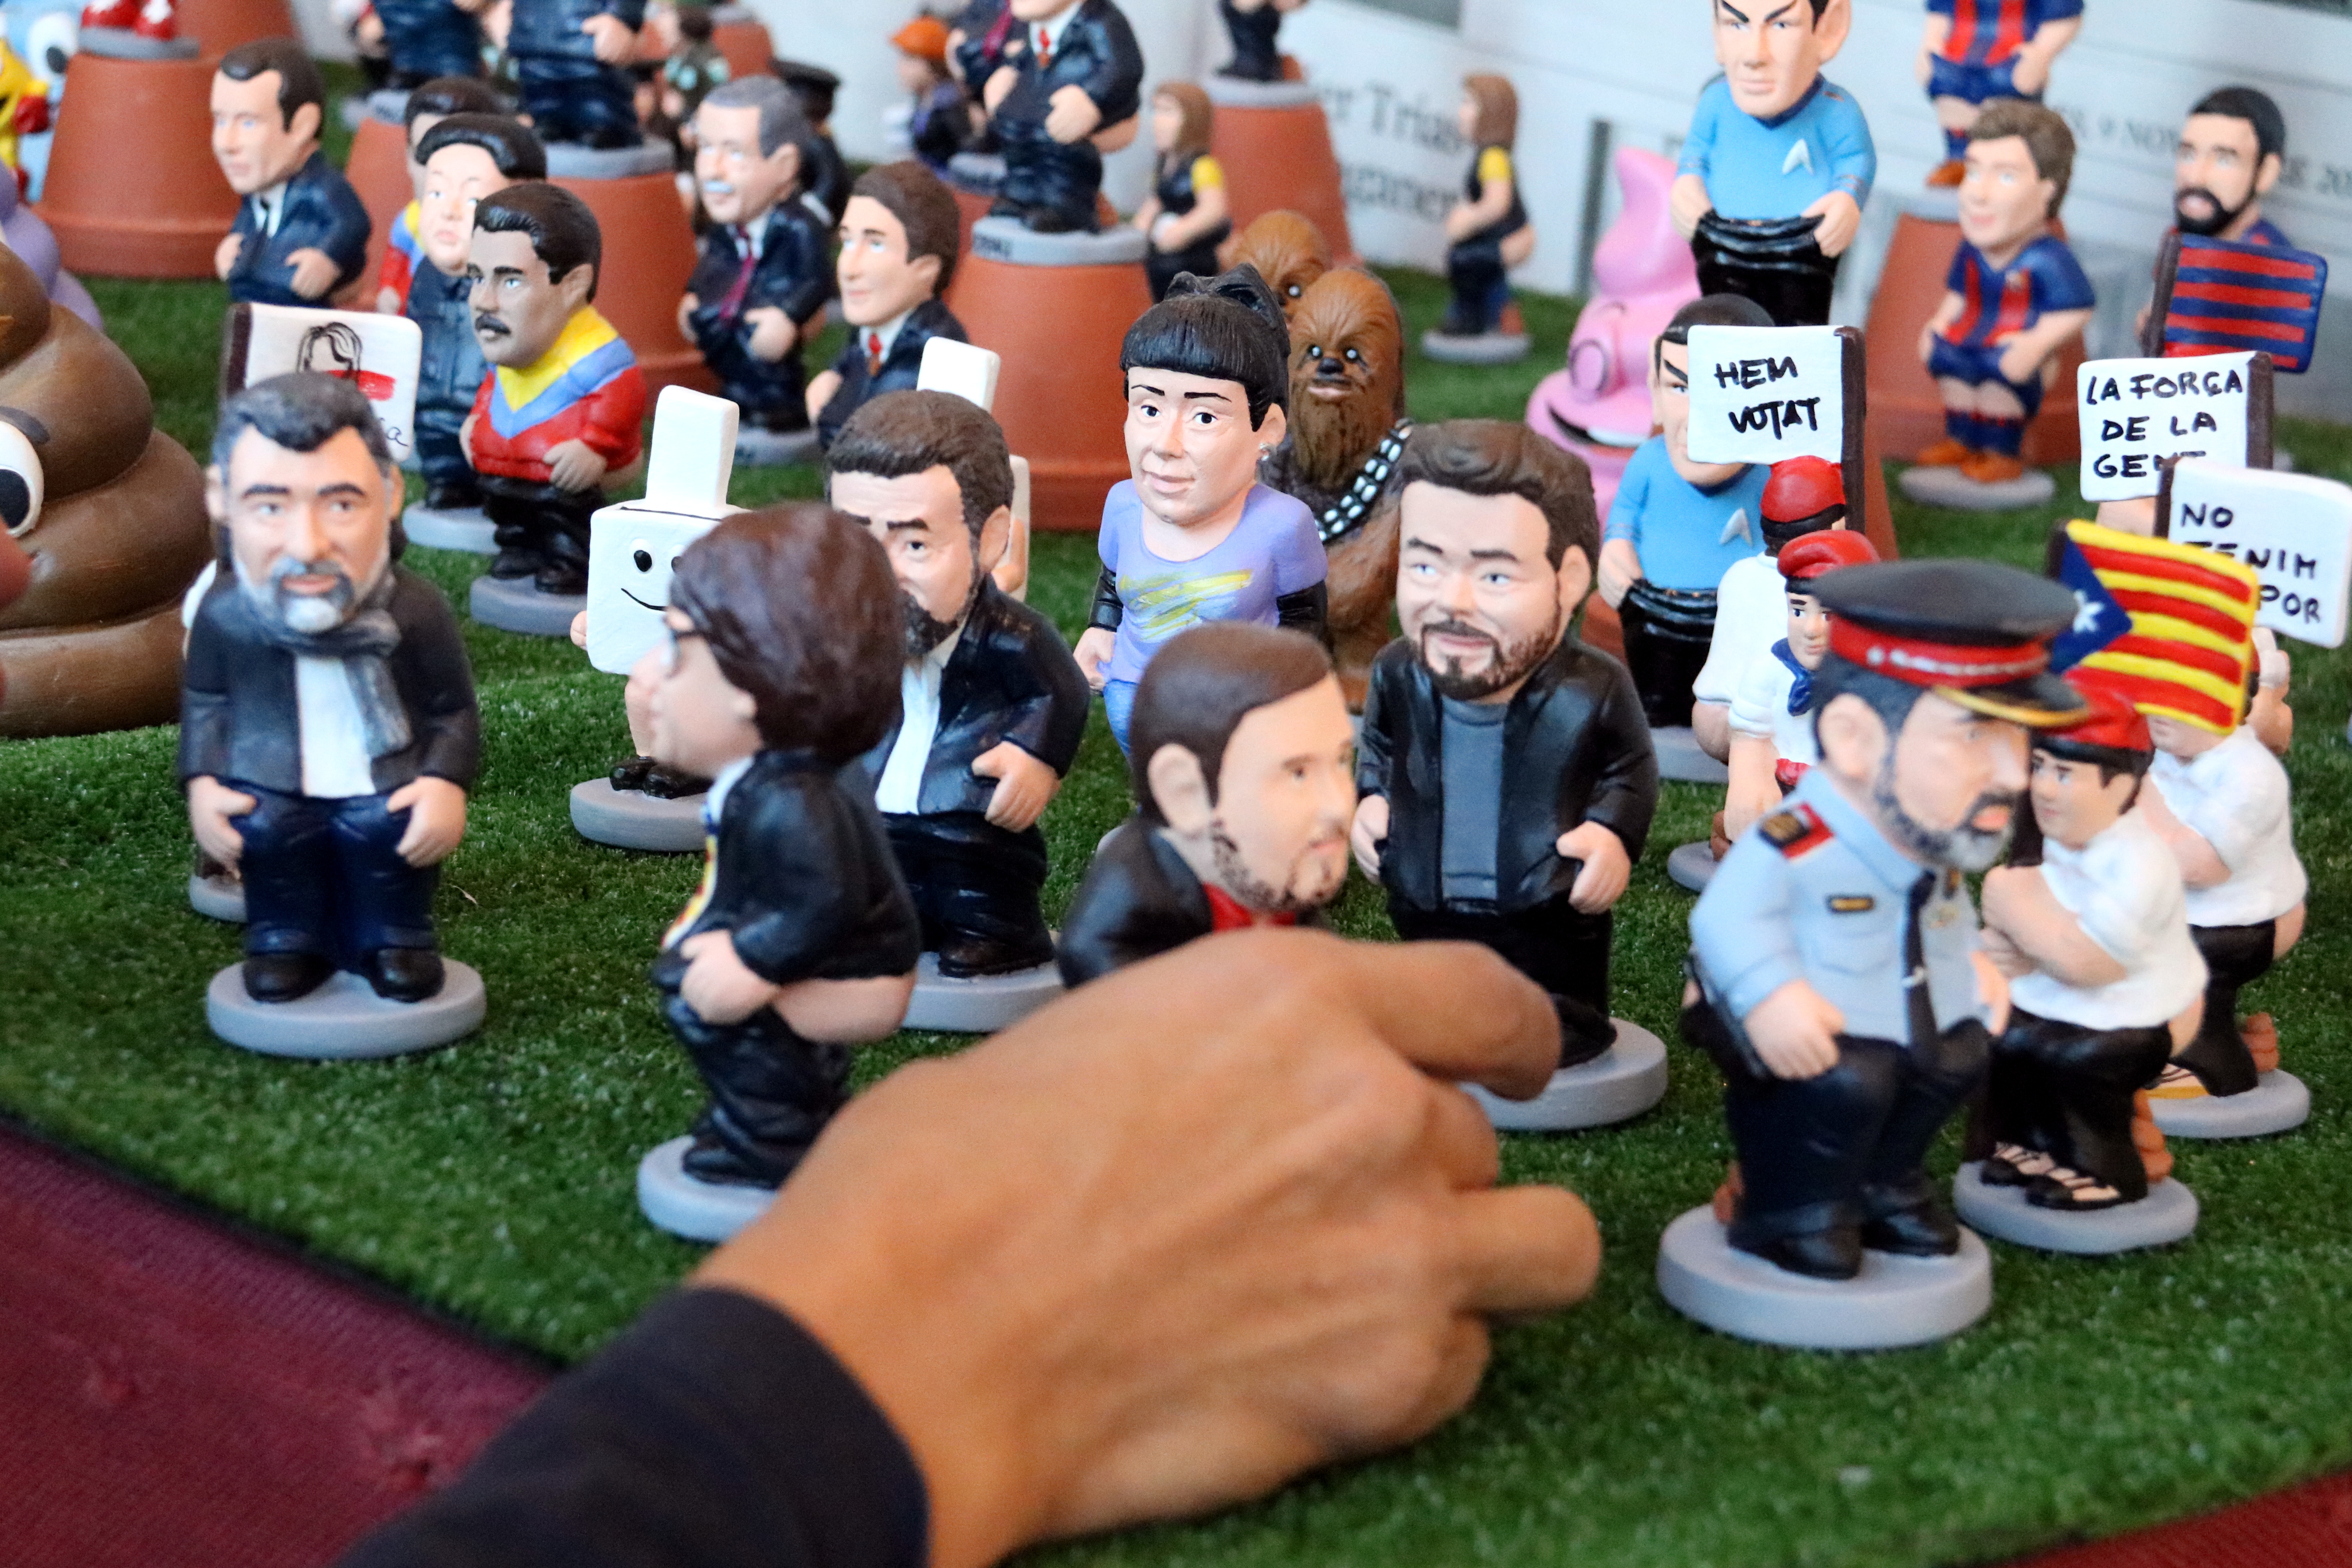 Jordi Cuixart and Jordi Sànchez, Gabriel Rufián, Anna Gabriel, Carles Puigdemont and Oriol Junqueras as 'caganer' Christmas figurines on November 6 2017 (by ACN)